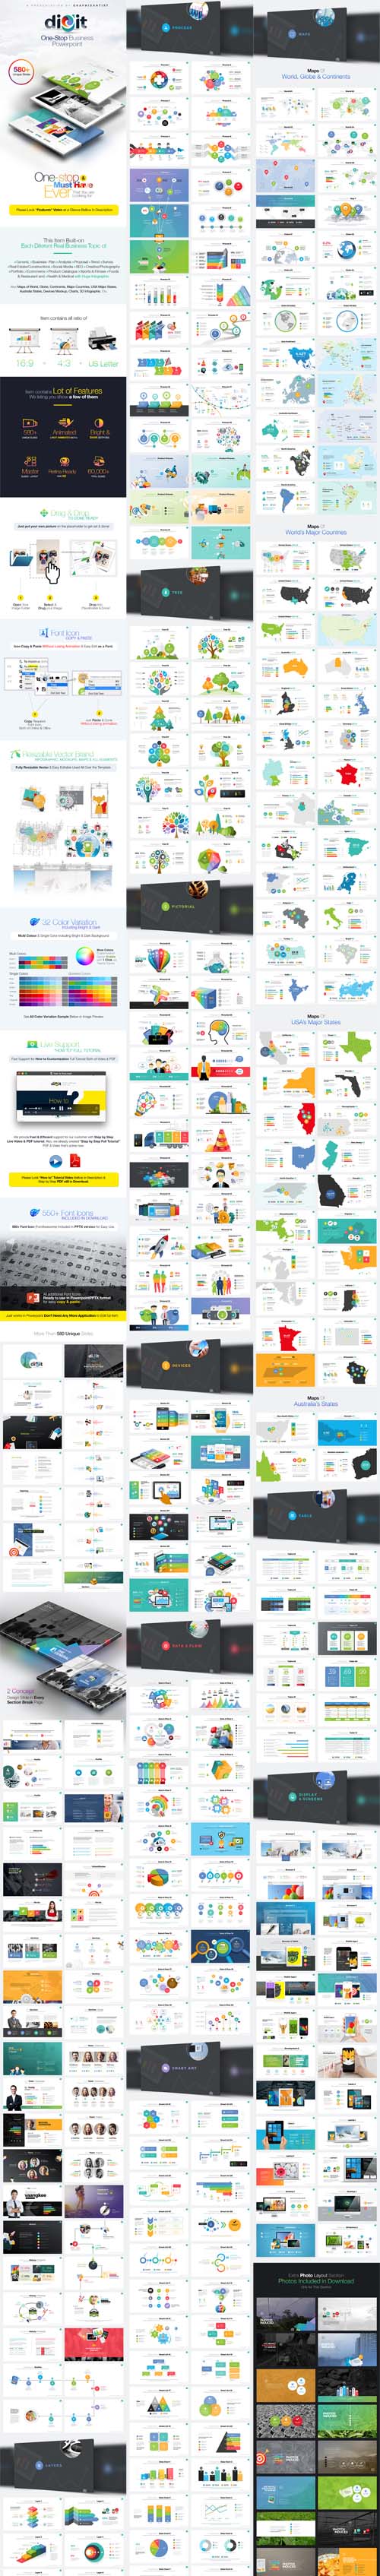 GraphicRiver - Digit | One-Stop Business Powerpoint 14314598